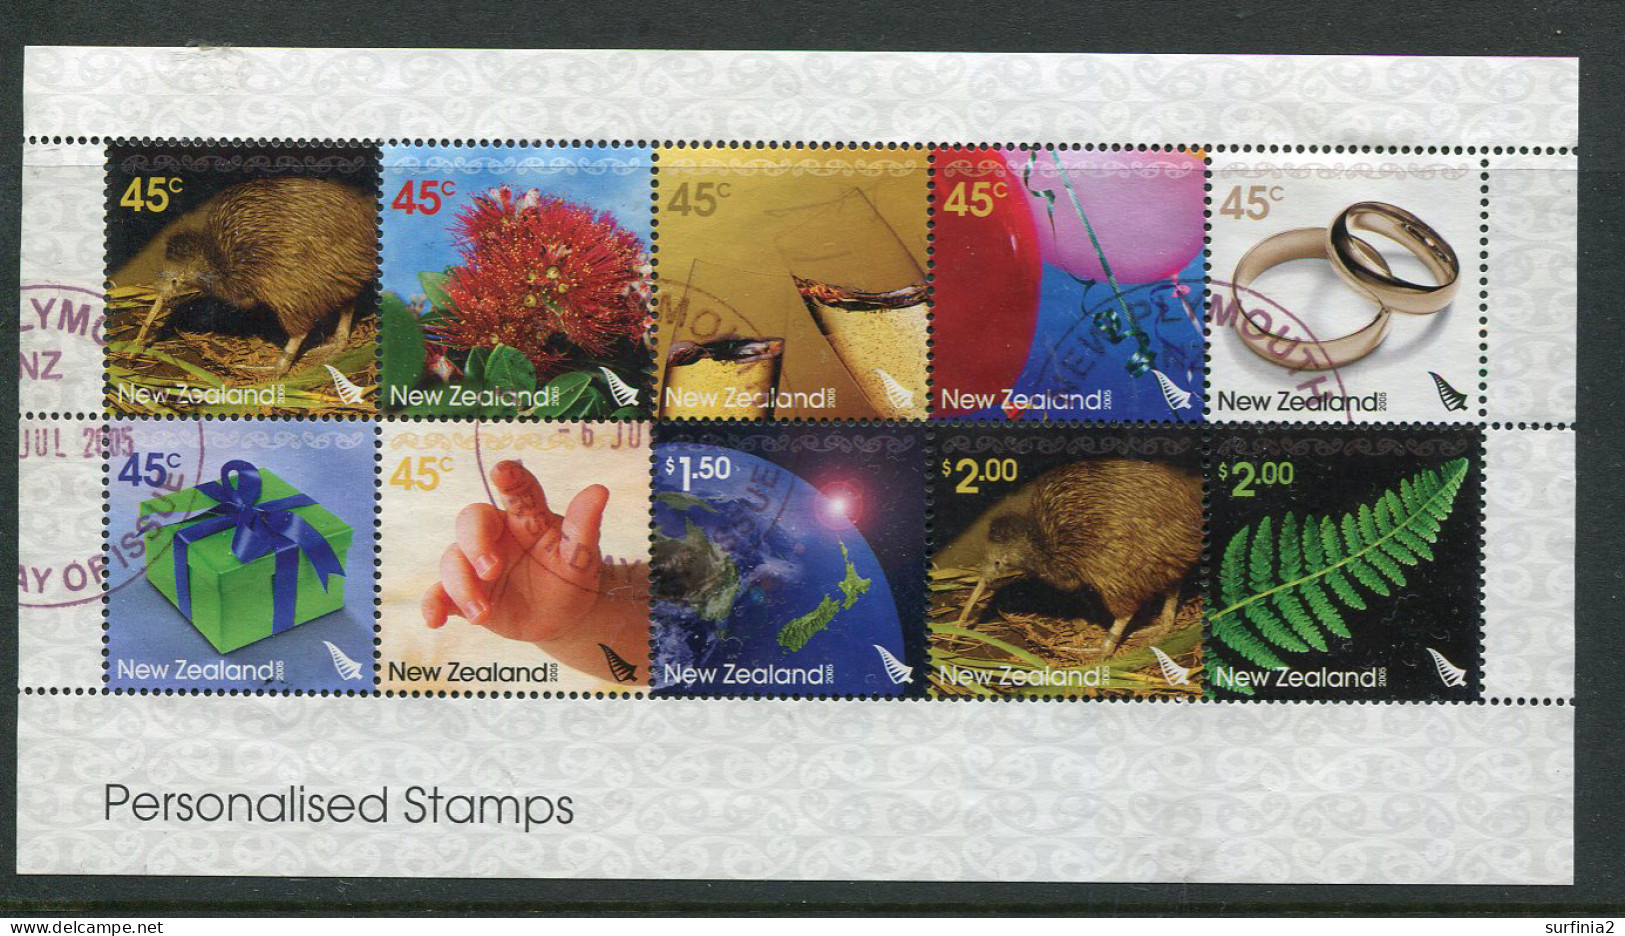 NEW ZEALAND 2005 PERSONALISED STAMPS SHEET 2801-10 FU - Gebraucht